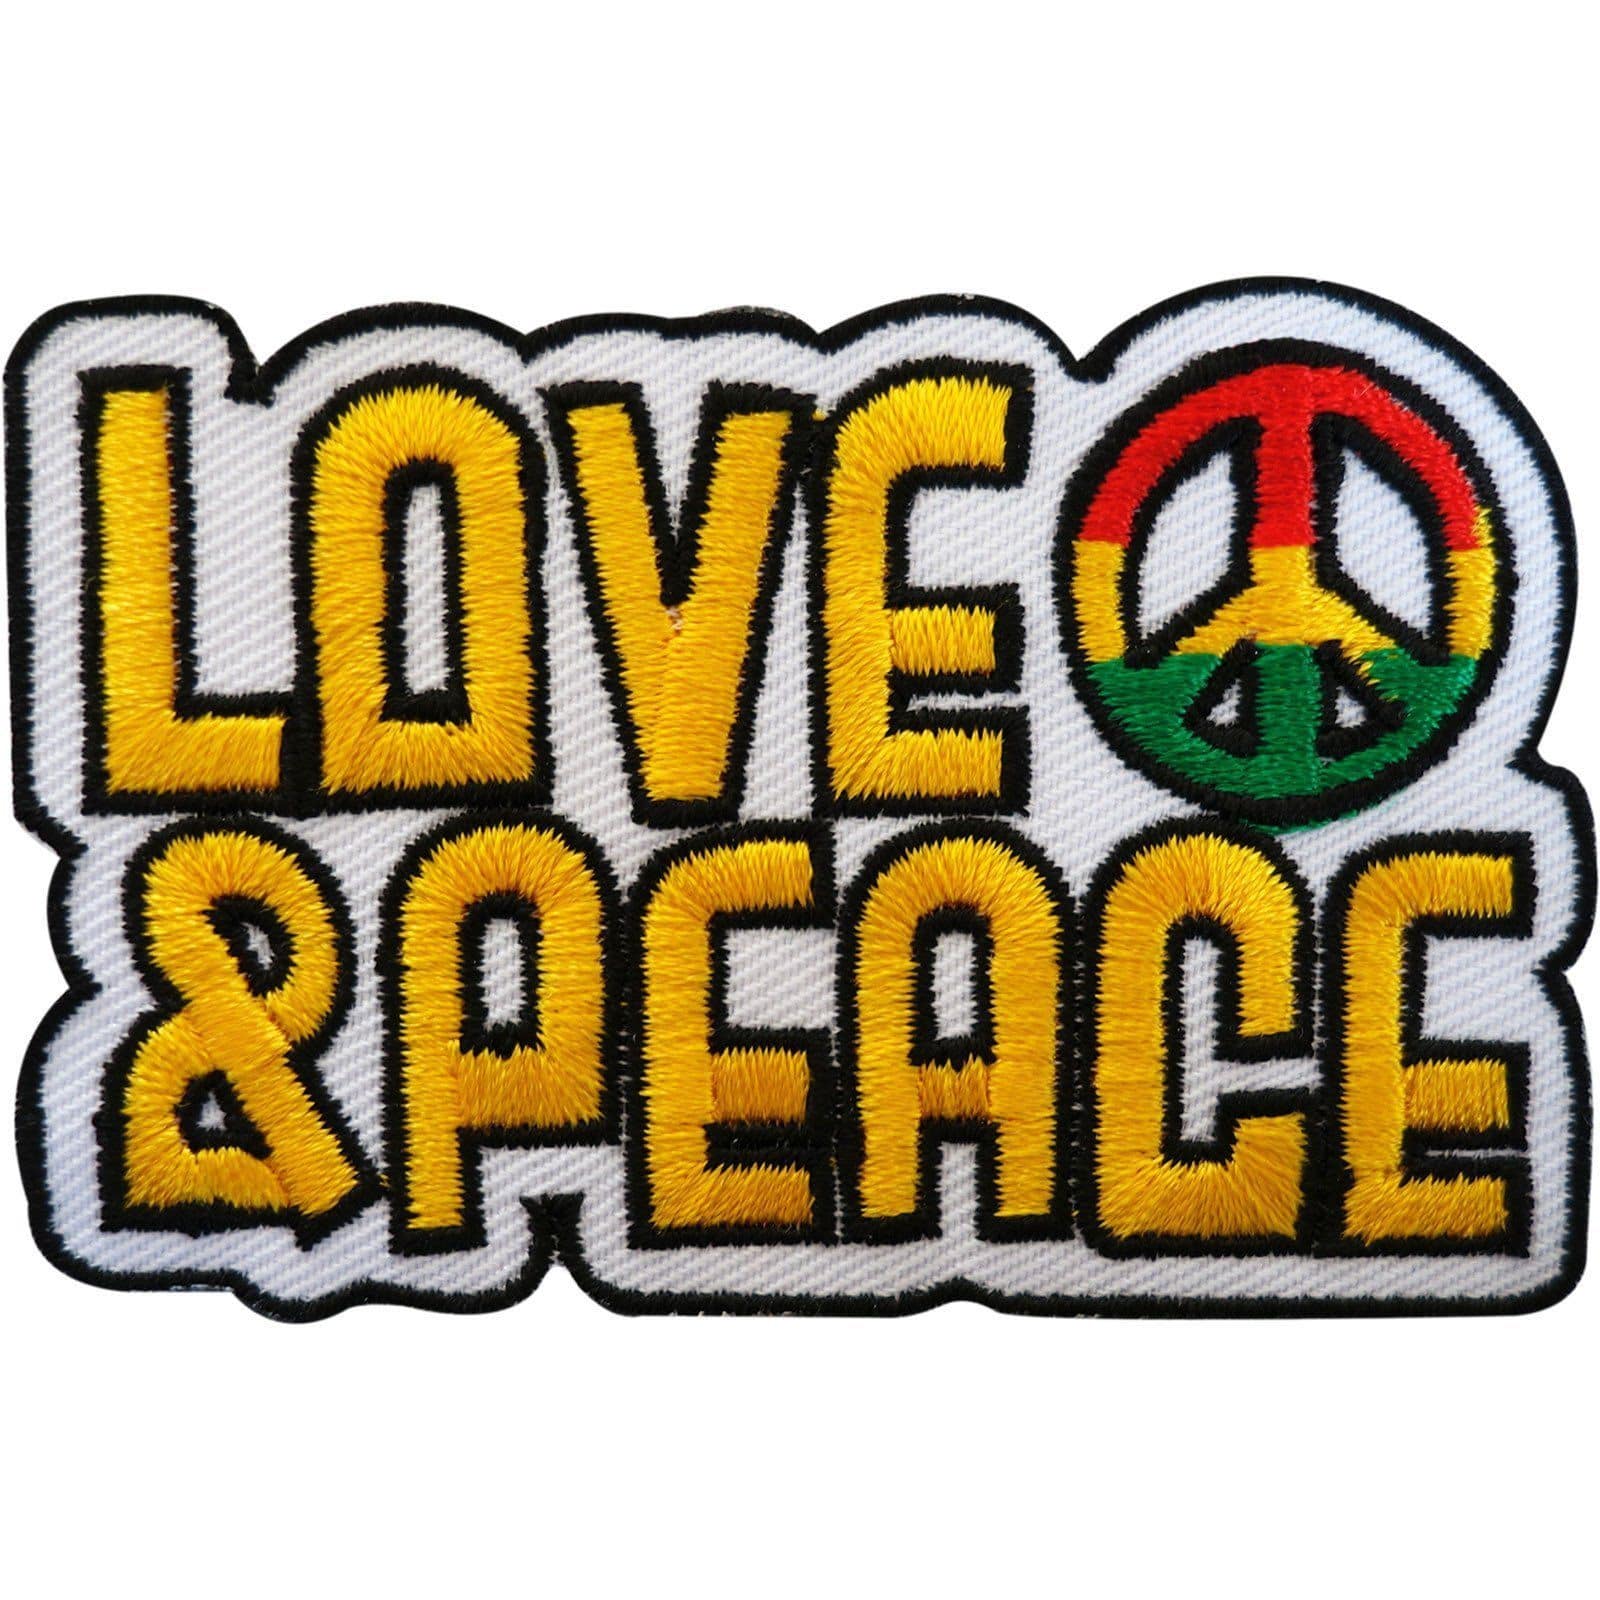 Embroidered Love and Peace Patch Badge Iron Sew On Hippie Rasta Reggae Sign Logo